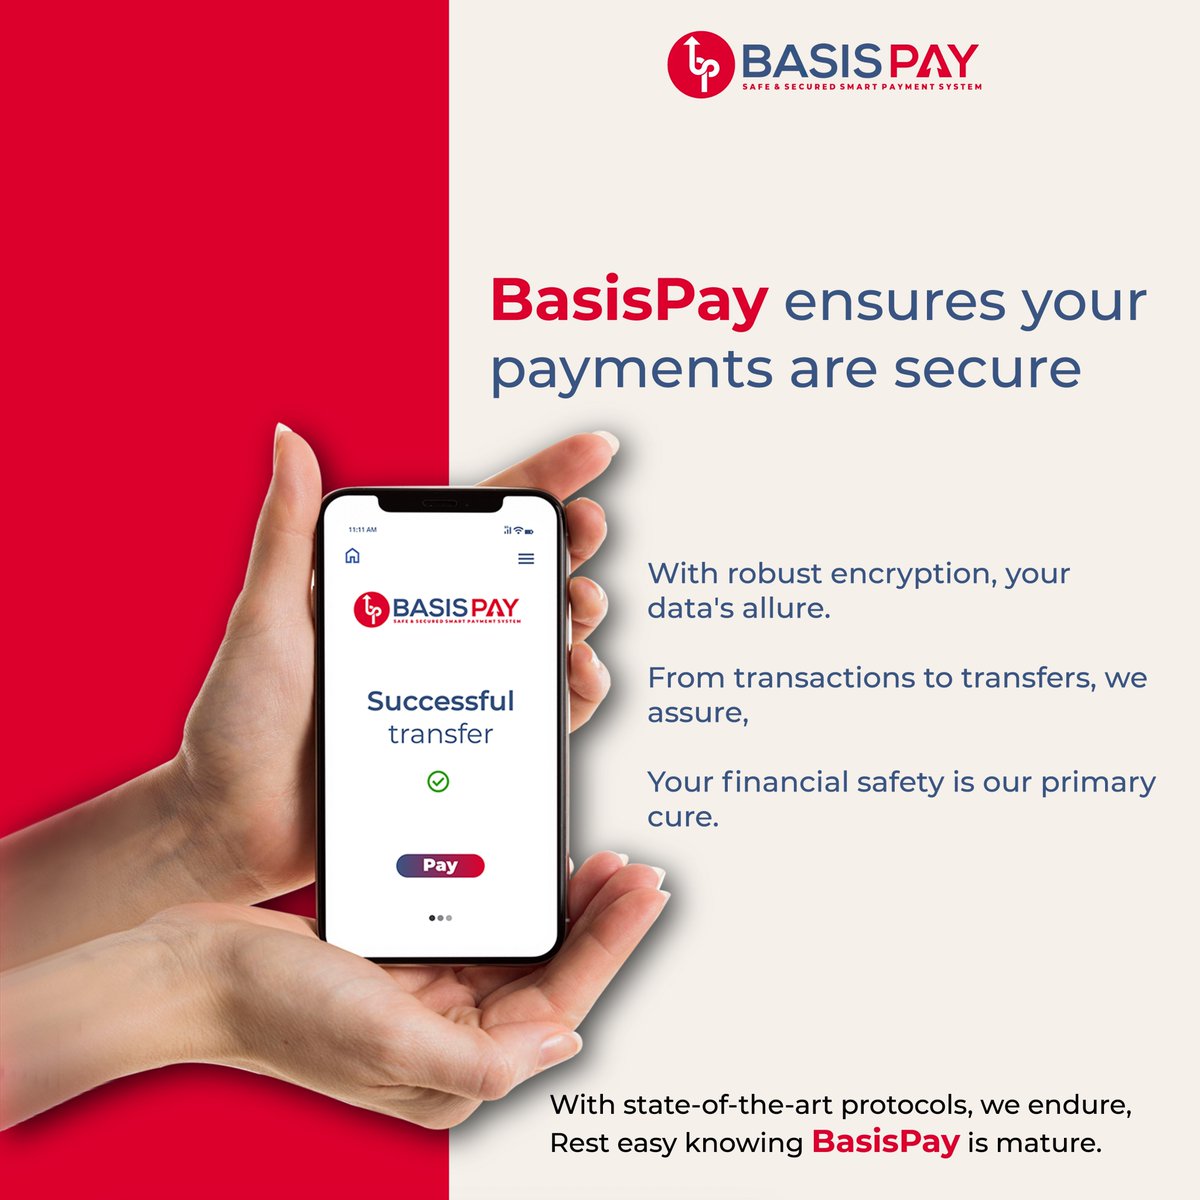 BasisPay payment system 

#basispay #upi #pointofsale #contactlesspayments #buy #bank #finance #news #online #mobile #shopping #pos #qrpay #qr #digitalpayment #payments #paymentgateway #india #digitalmoney #debitcard #creditcard #buy #digital #mobilepayment #world #ai